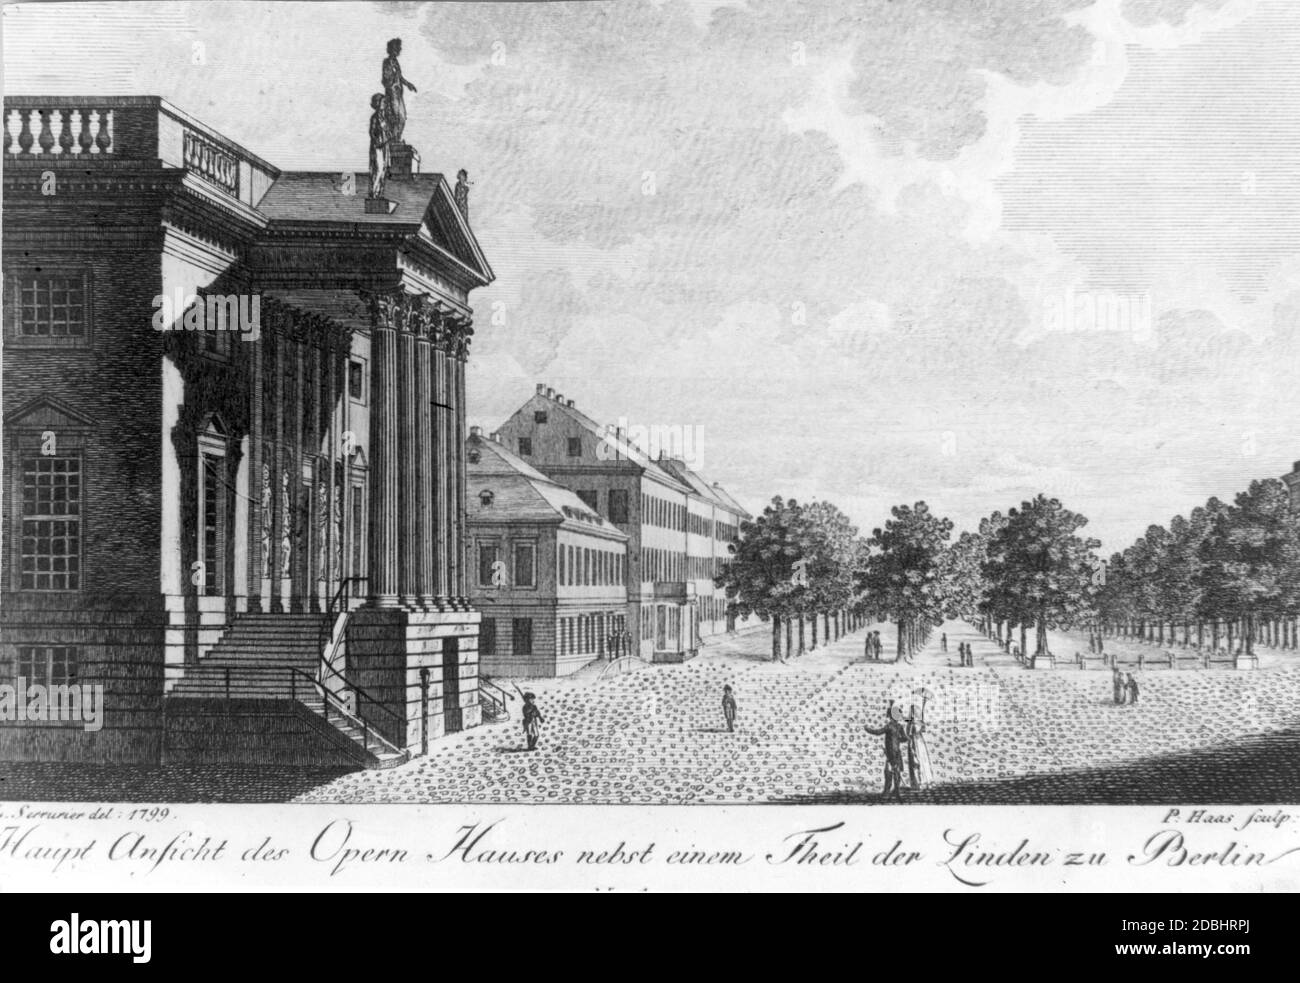 This drawing by P. Haas from 1799 shows the boulevard Unter den Linden in Berlin with the Opera House (left). Stock Photo